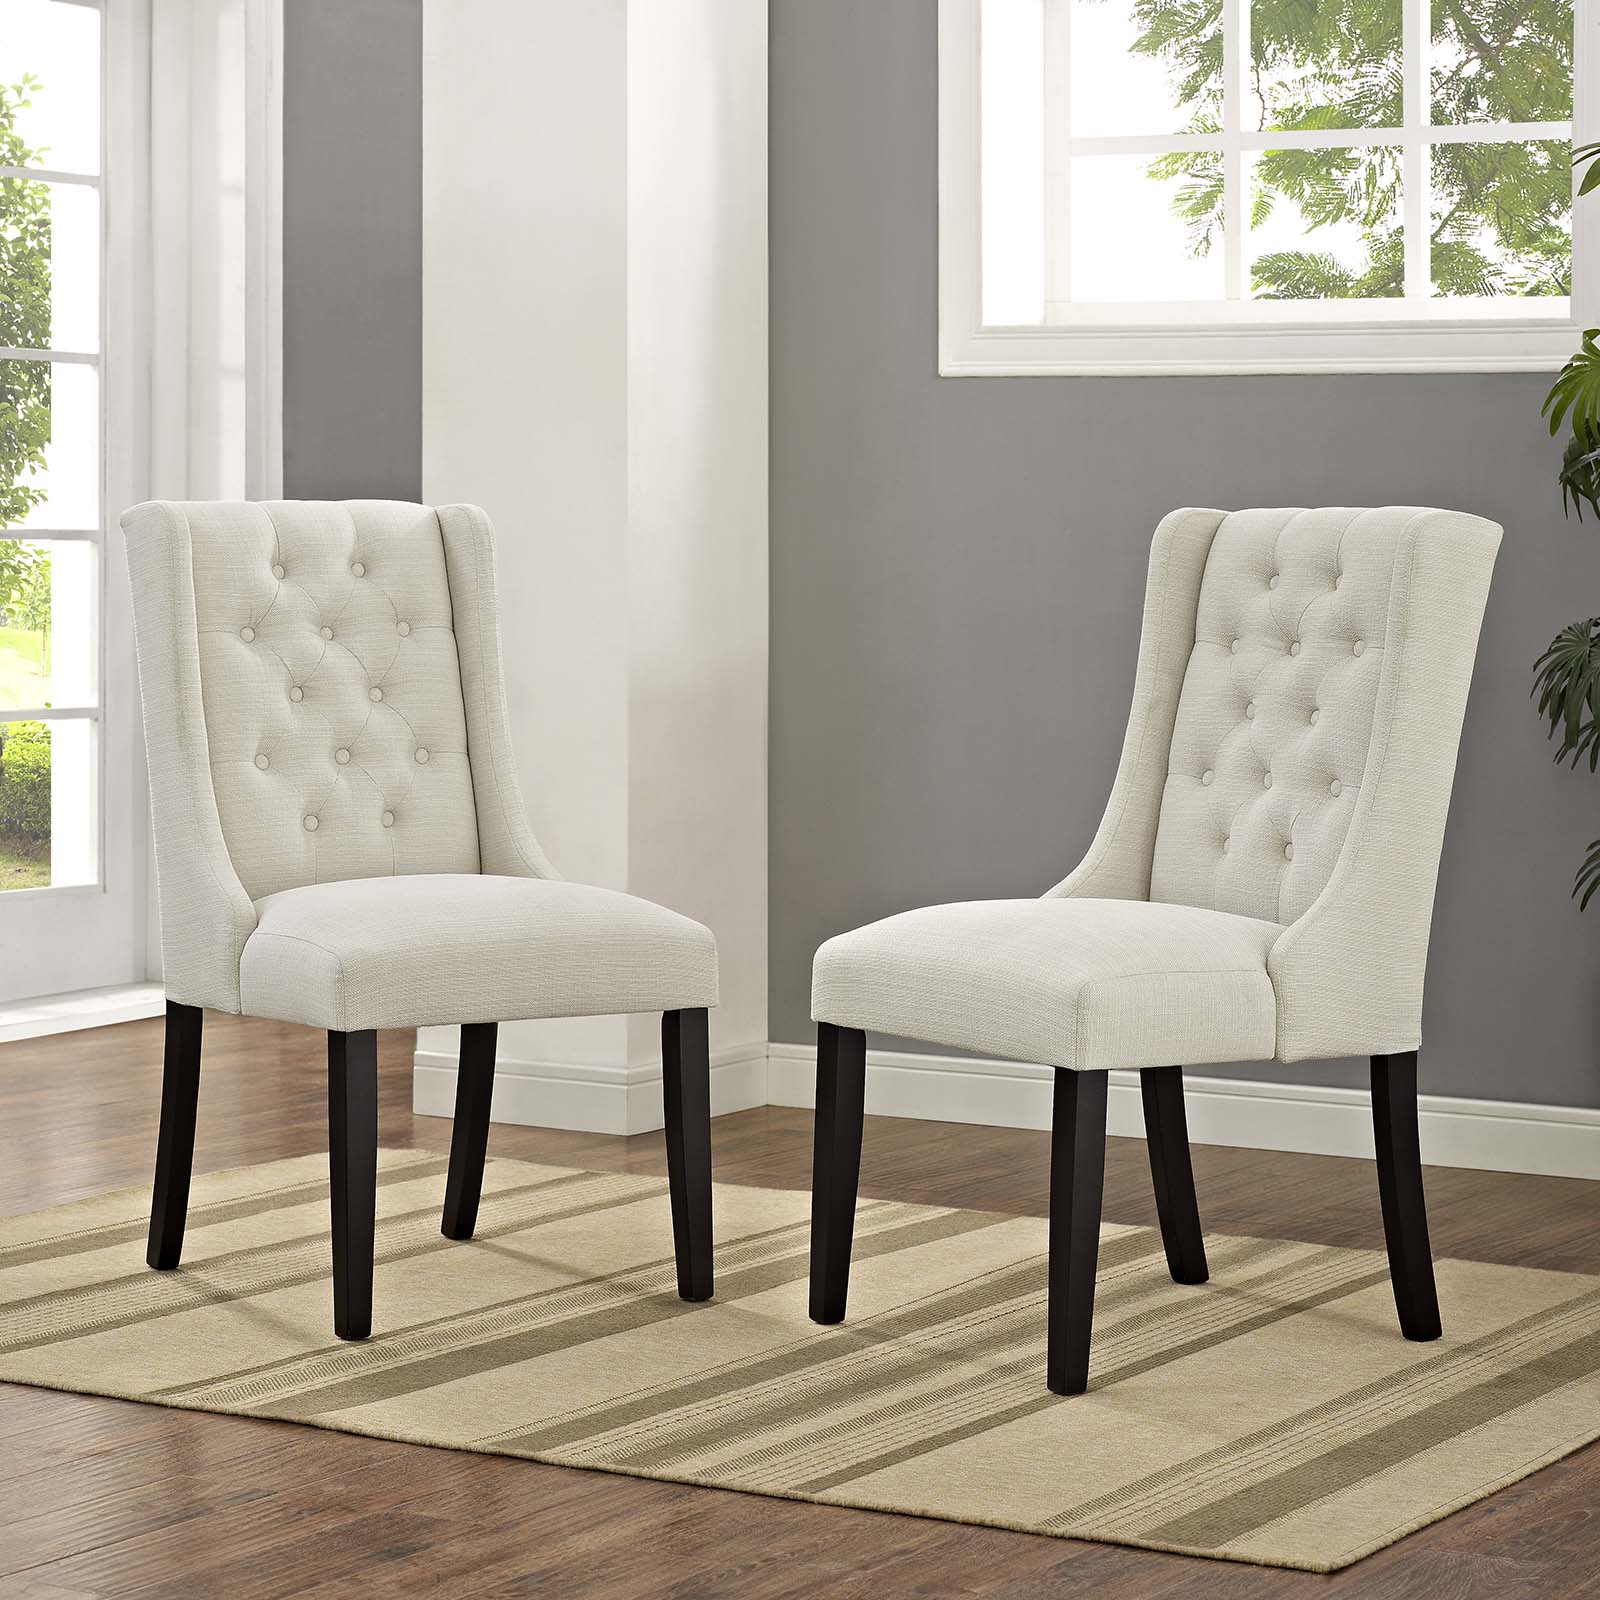 Modway Dining Chairs - Baronet Dining Chair Fabric Beige (Set of 2)